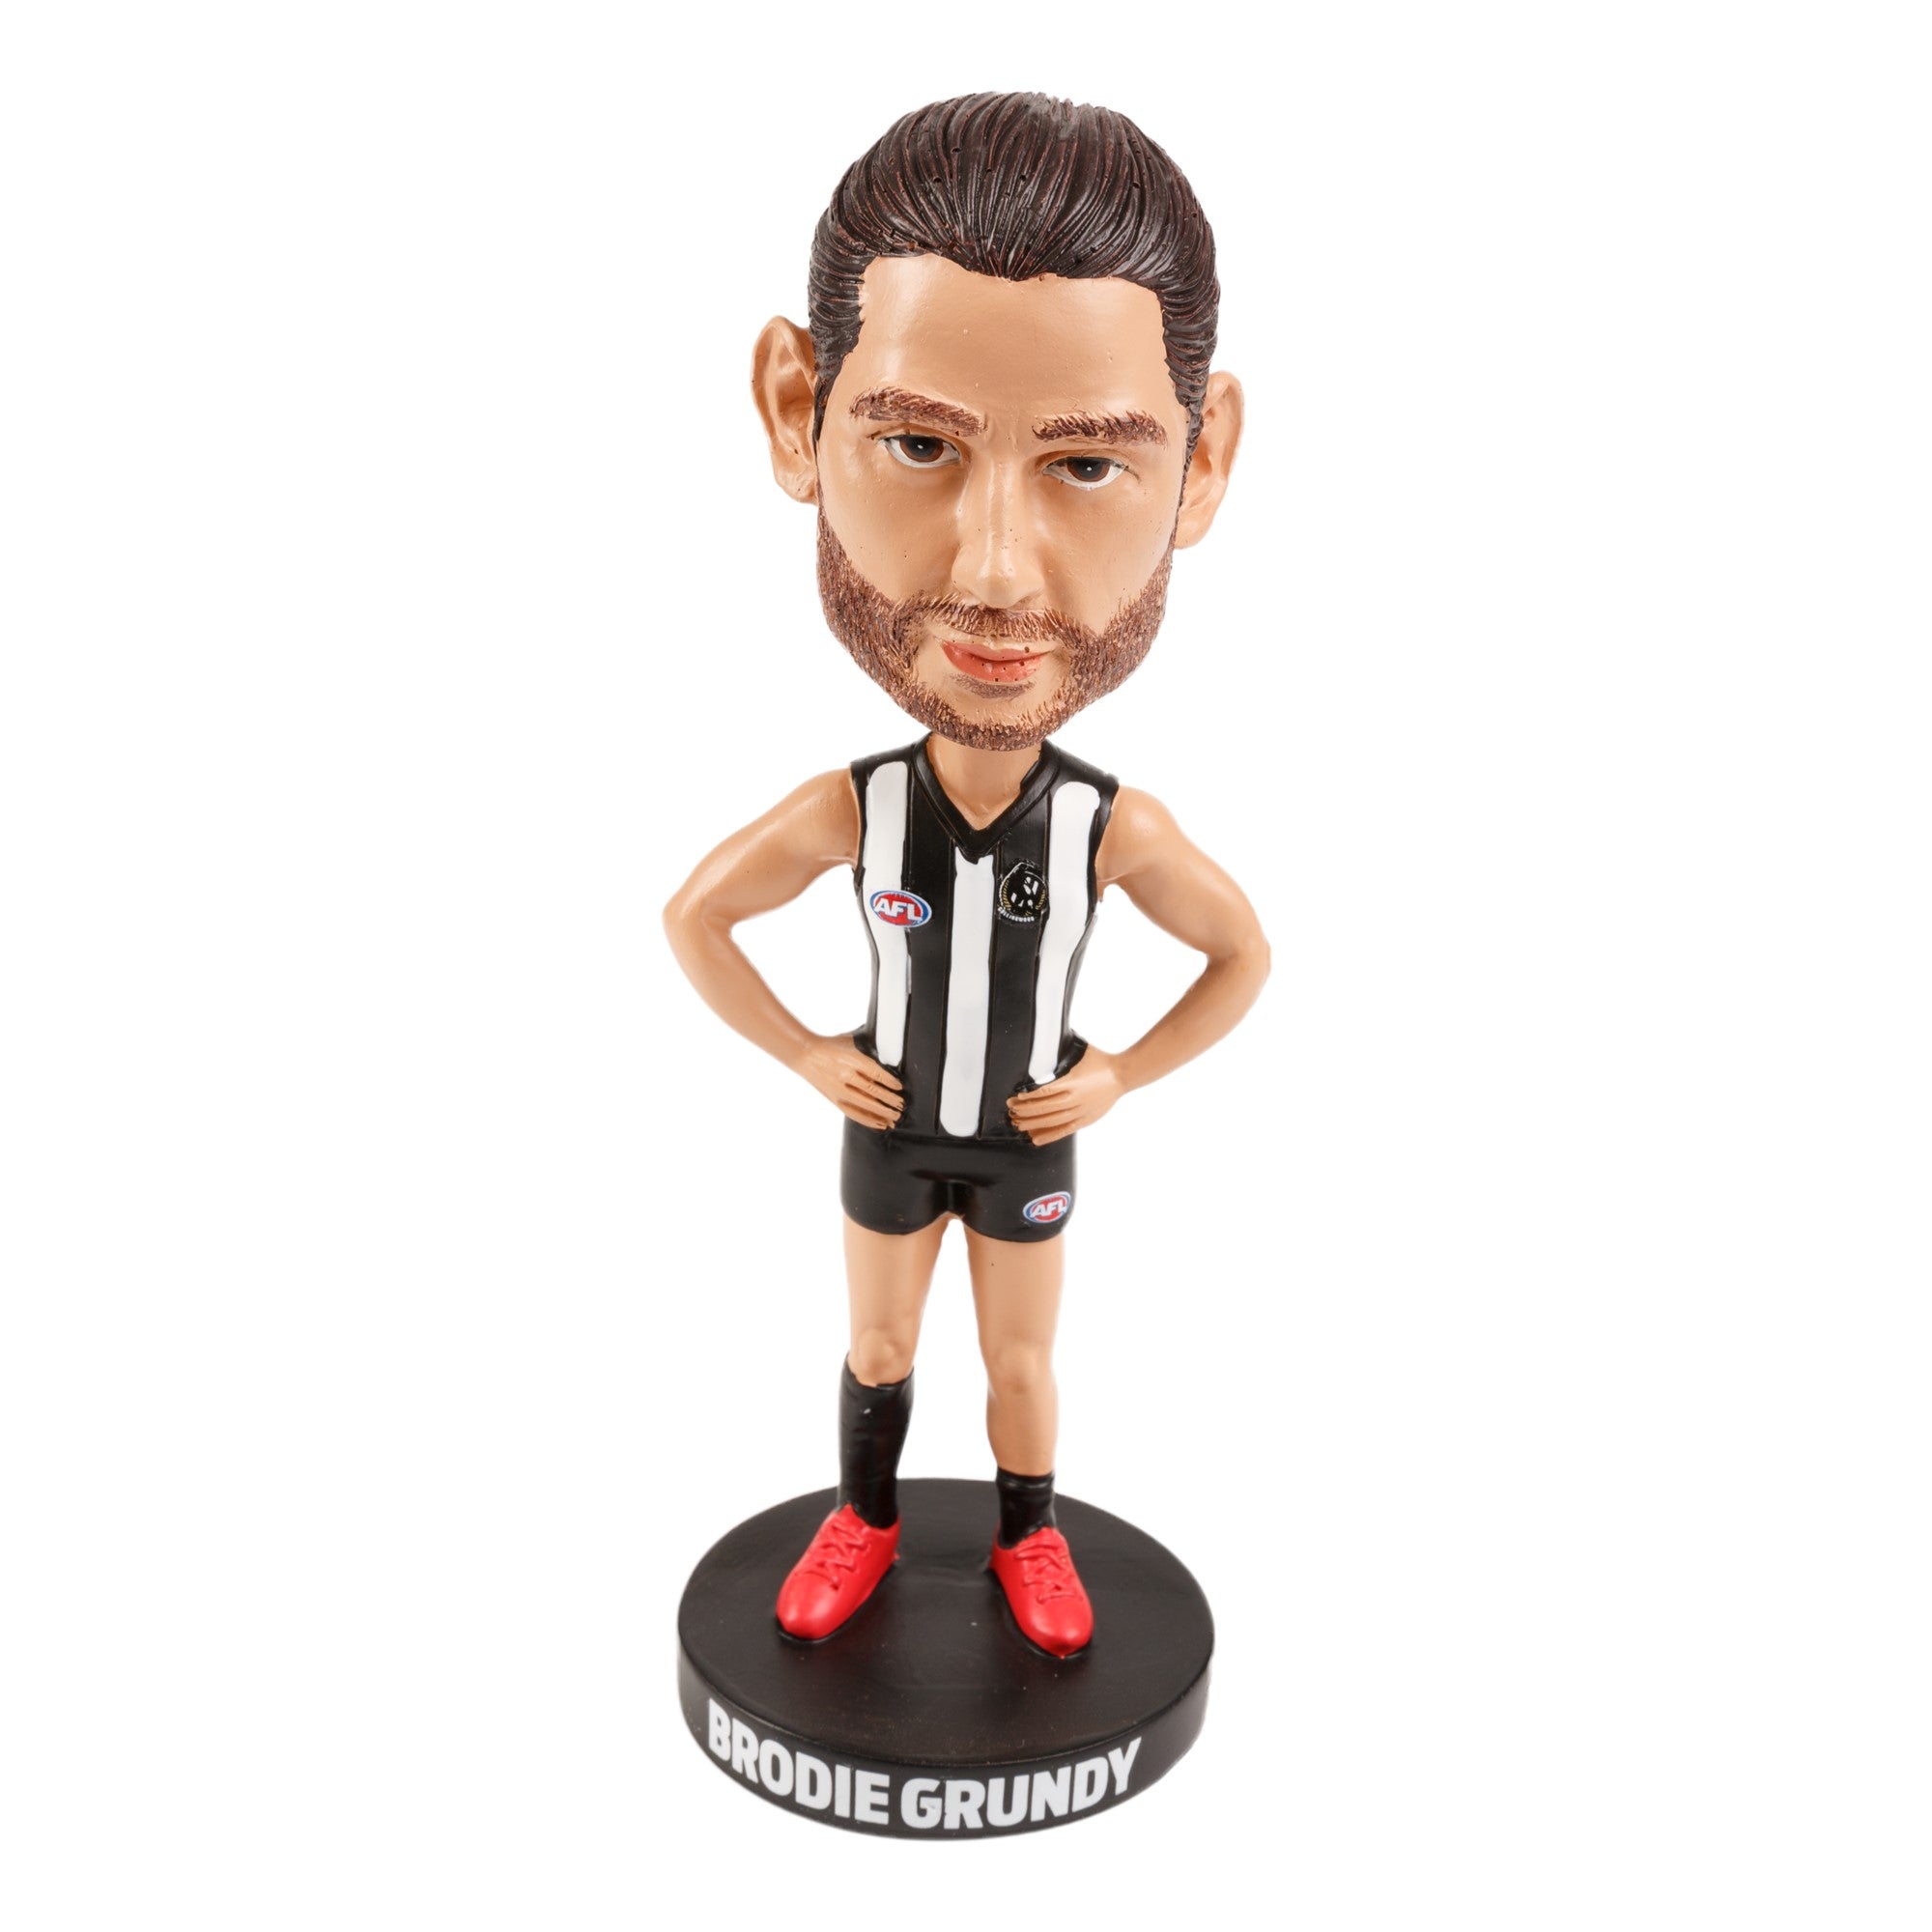 Brodie Grundy Collingwood Magpies Bobble Head